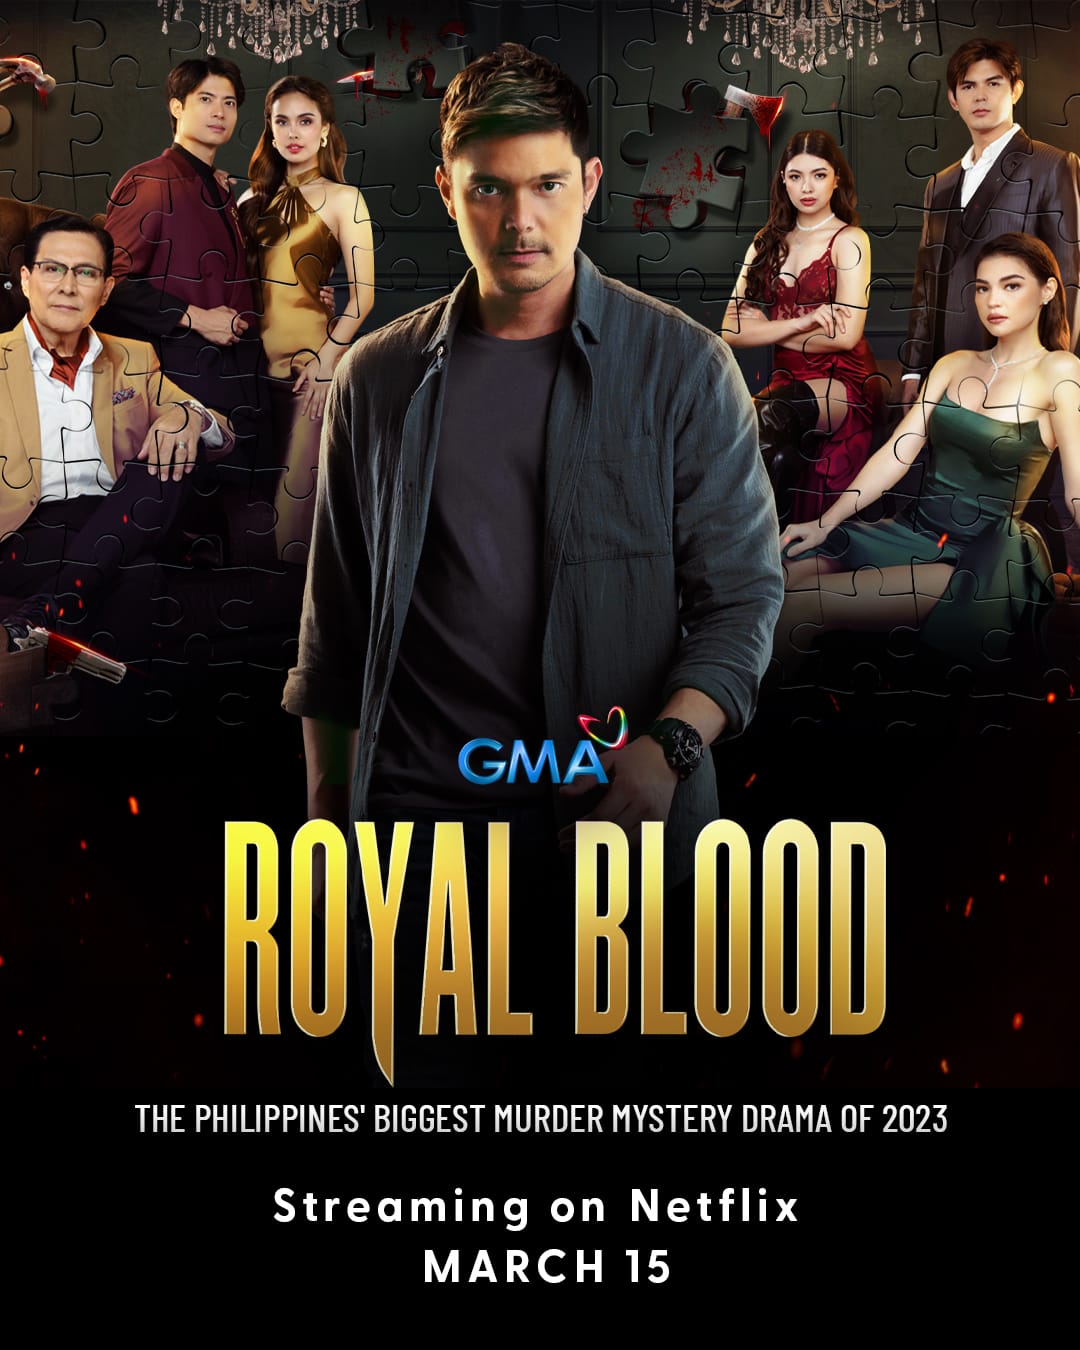 GMA-7’s Murder Mystery Drama ‘Royal Blood’ to Premiere on Netflix on March 15